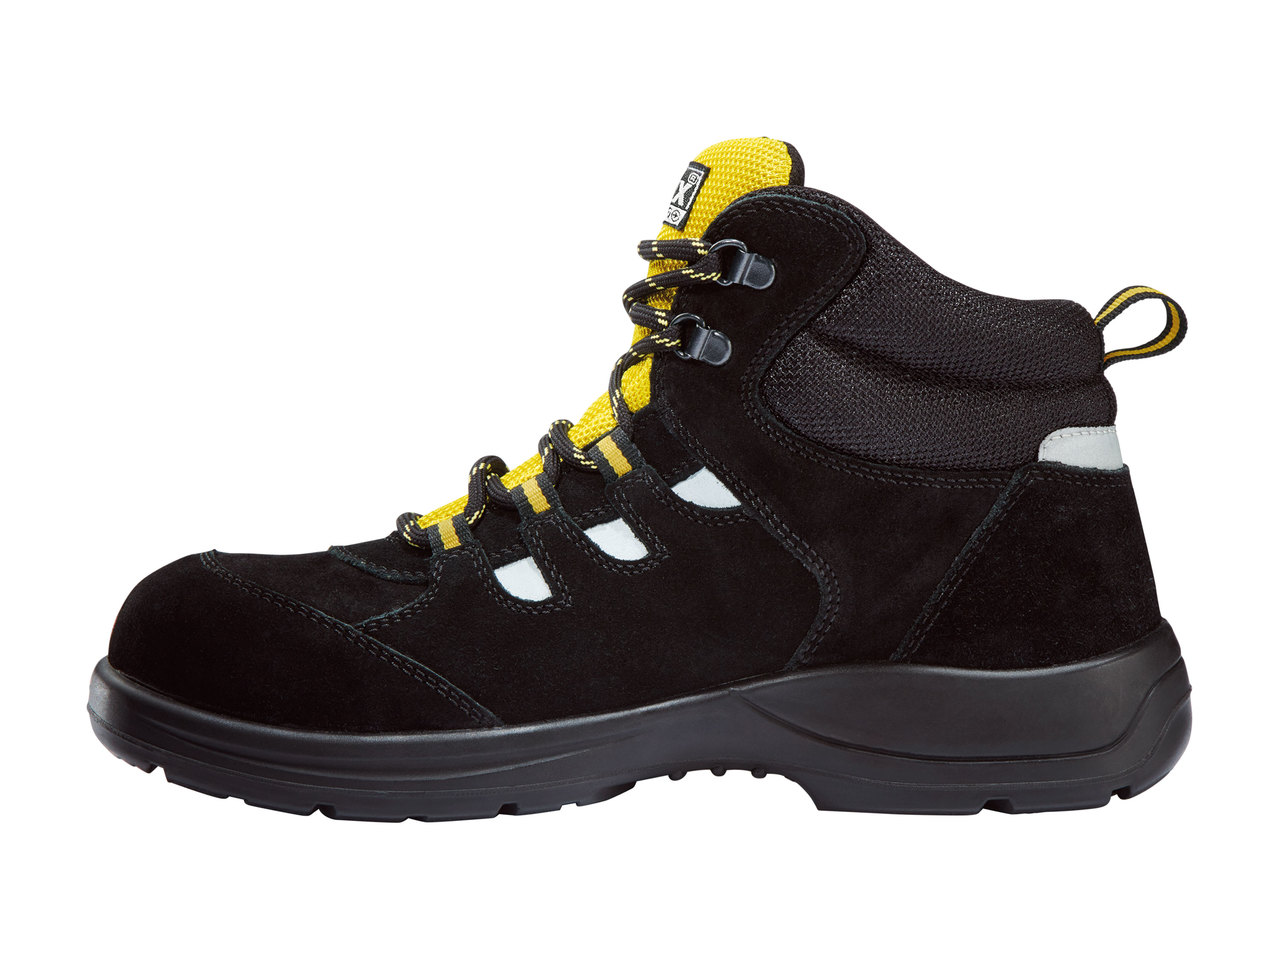 Powerfix Profi Leather Safety Shoes or Boots1